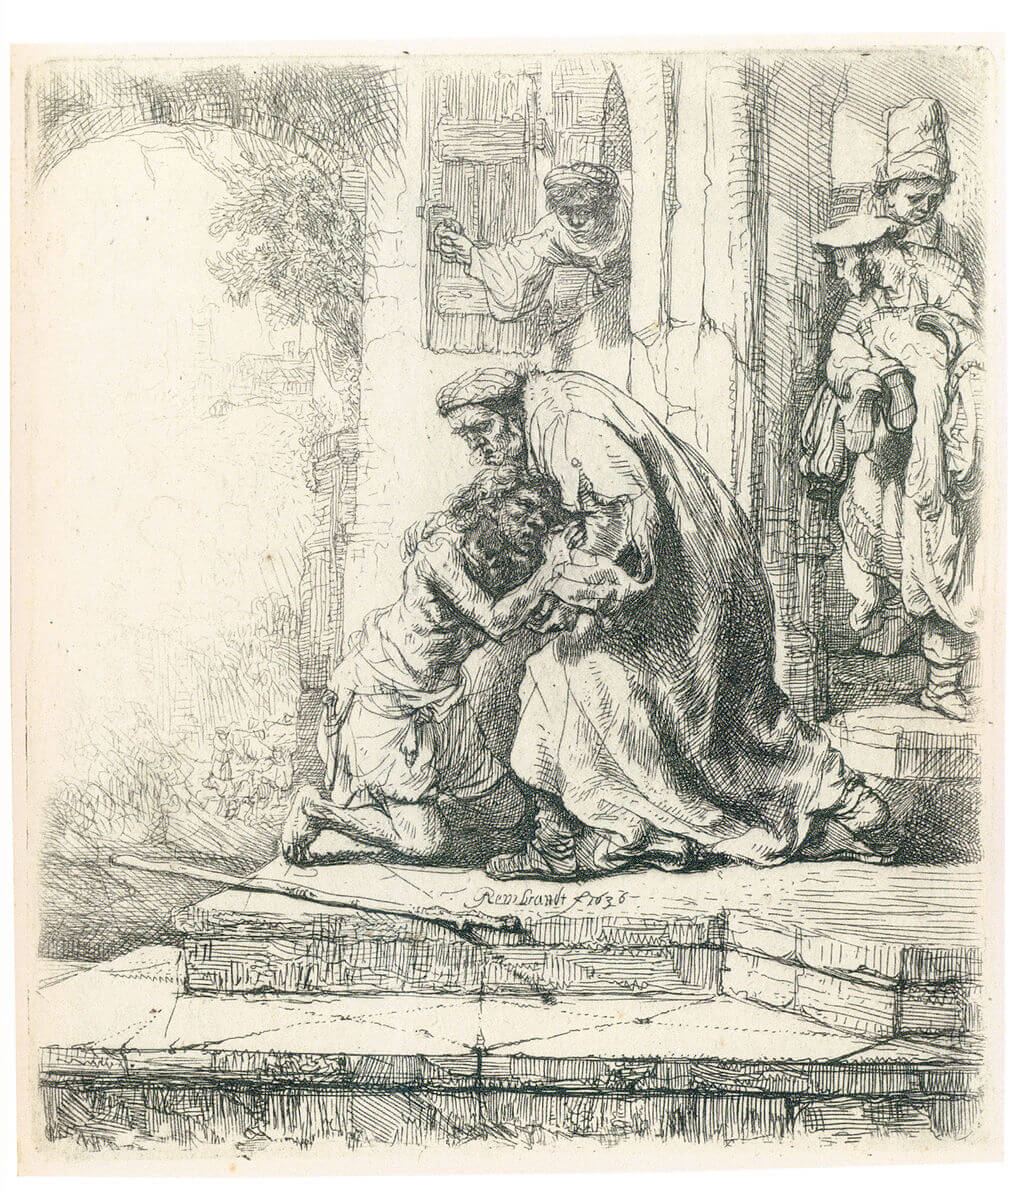 1636 etching by Rembrandt on The Return of the Prodigal Son